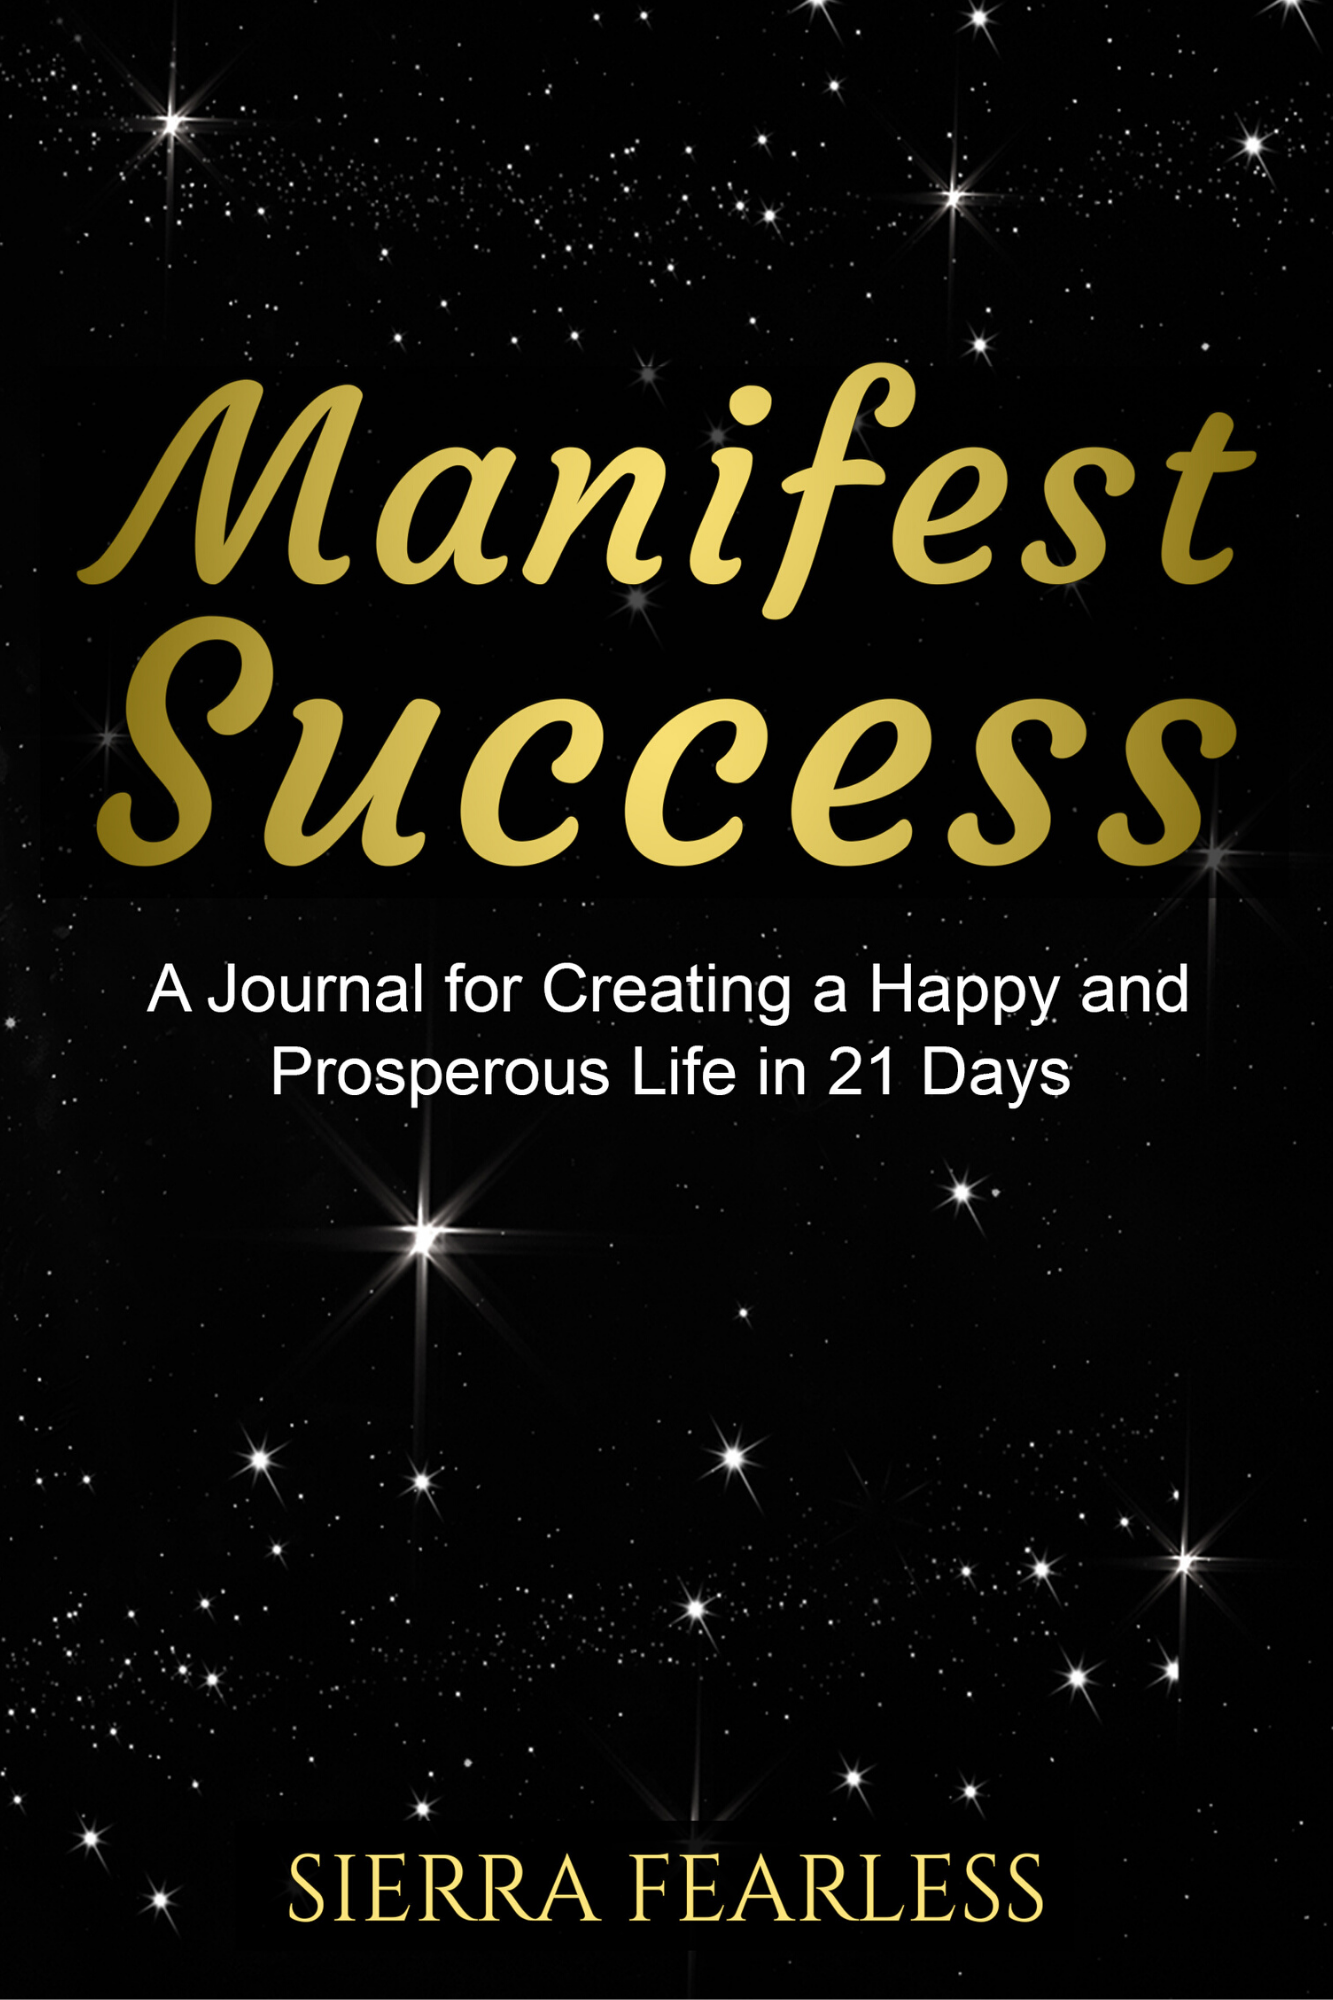 FREE: Manifest Success: A Journal for Creating a Happy and Prosperous Life in 21 Days by Sierra Fearless